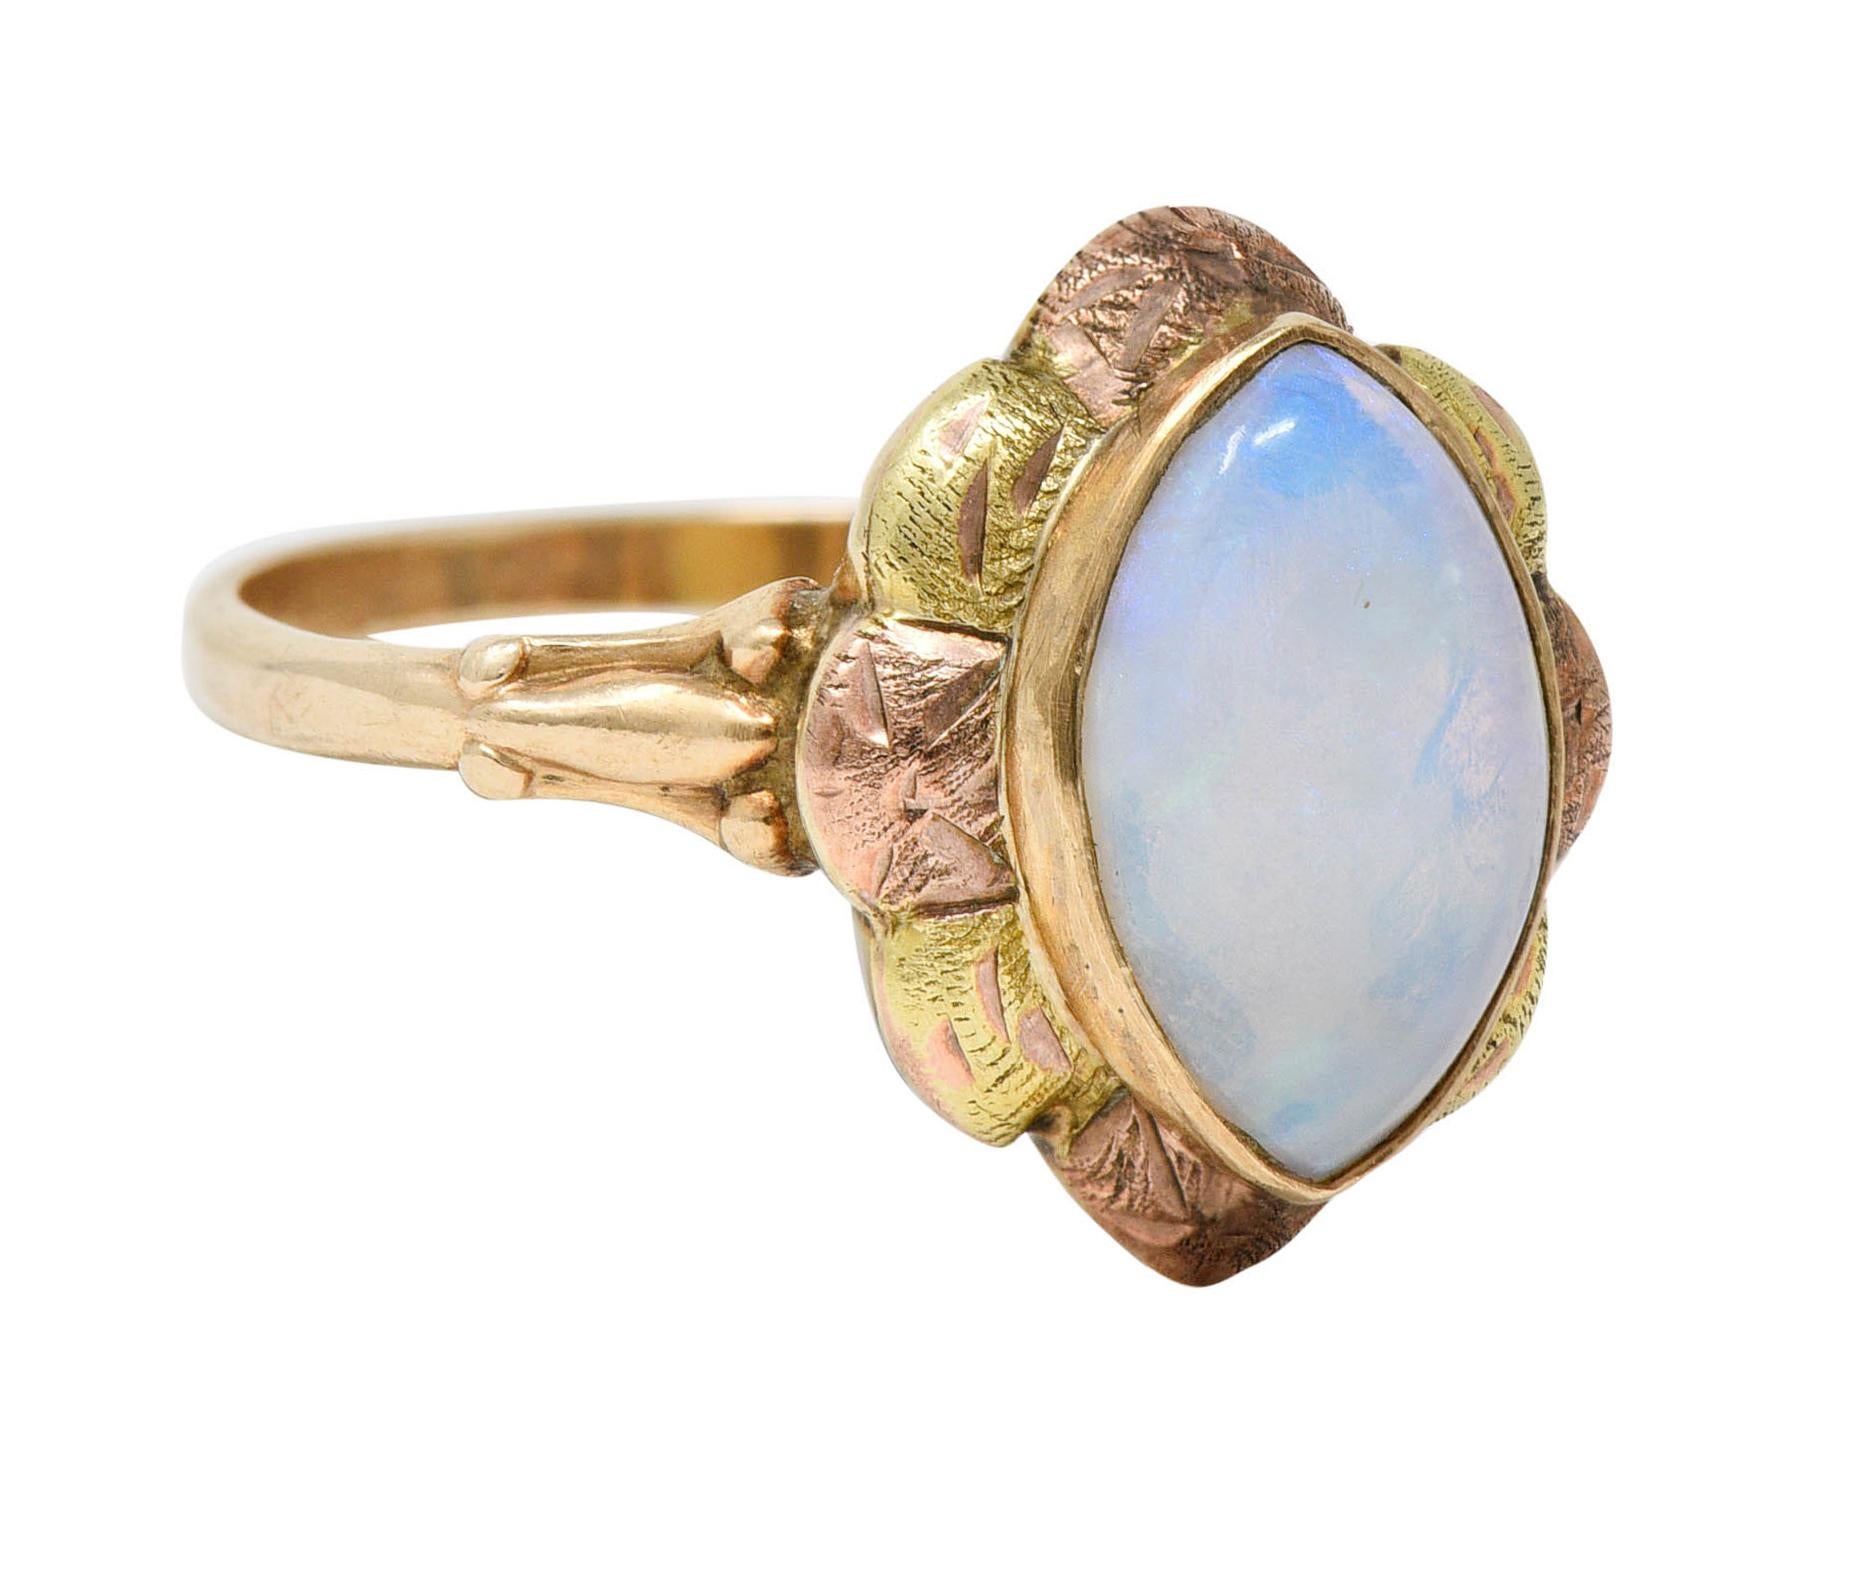 Centering a navette opal cabochon measuring approximately 12.0 x 7.0 mm

Opal is translucent white in body color with moderate green/blue play-of-color

With floral green and rose gold surround

Completed by grooved shoulders and slim band

Stamped